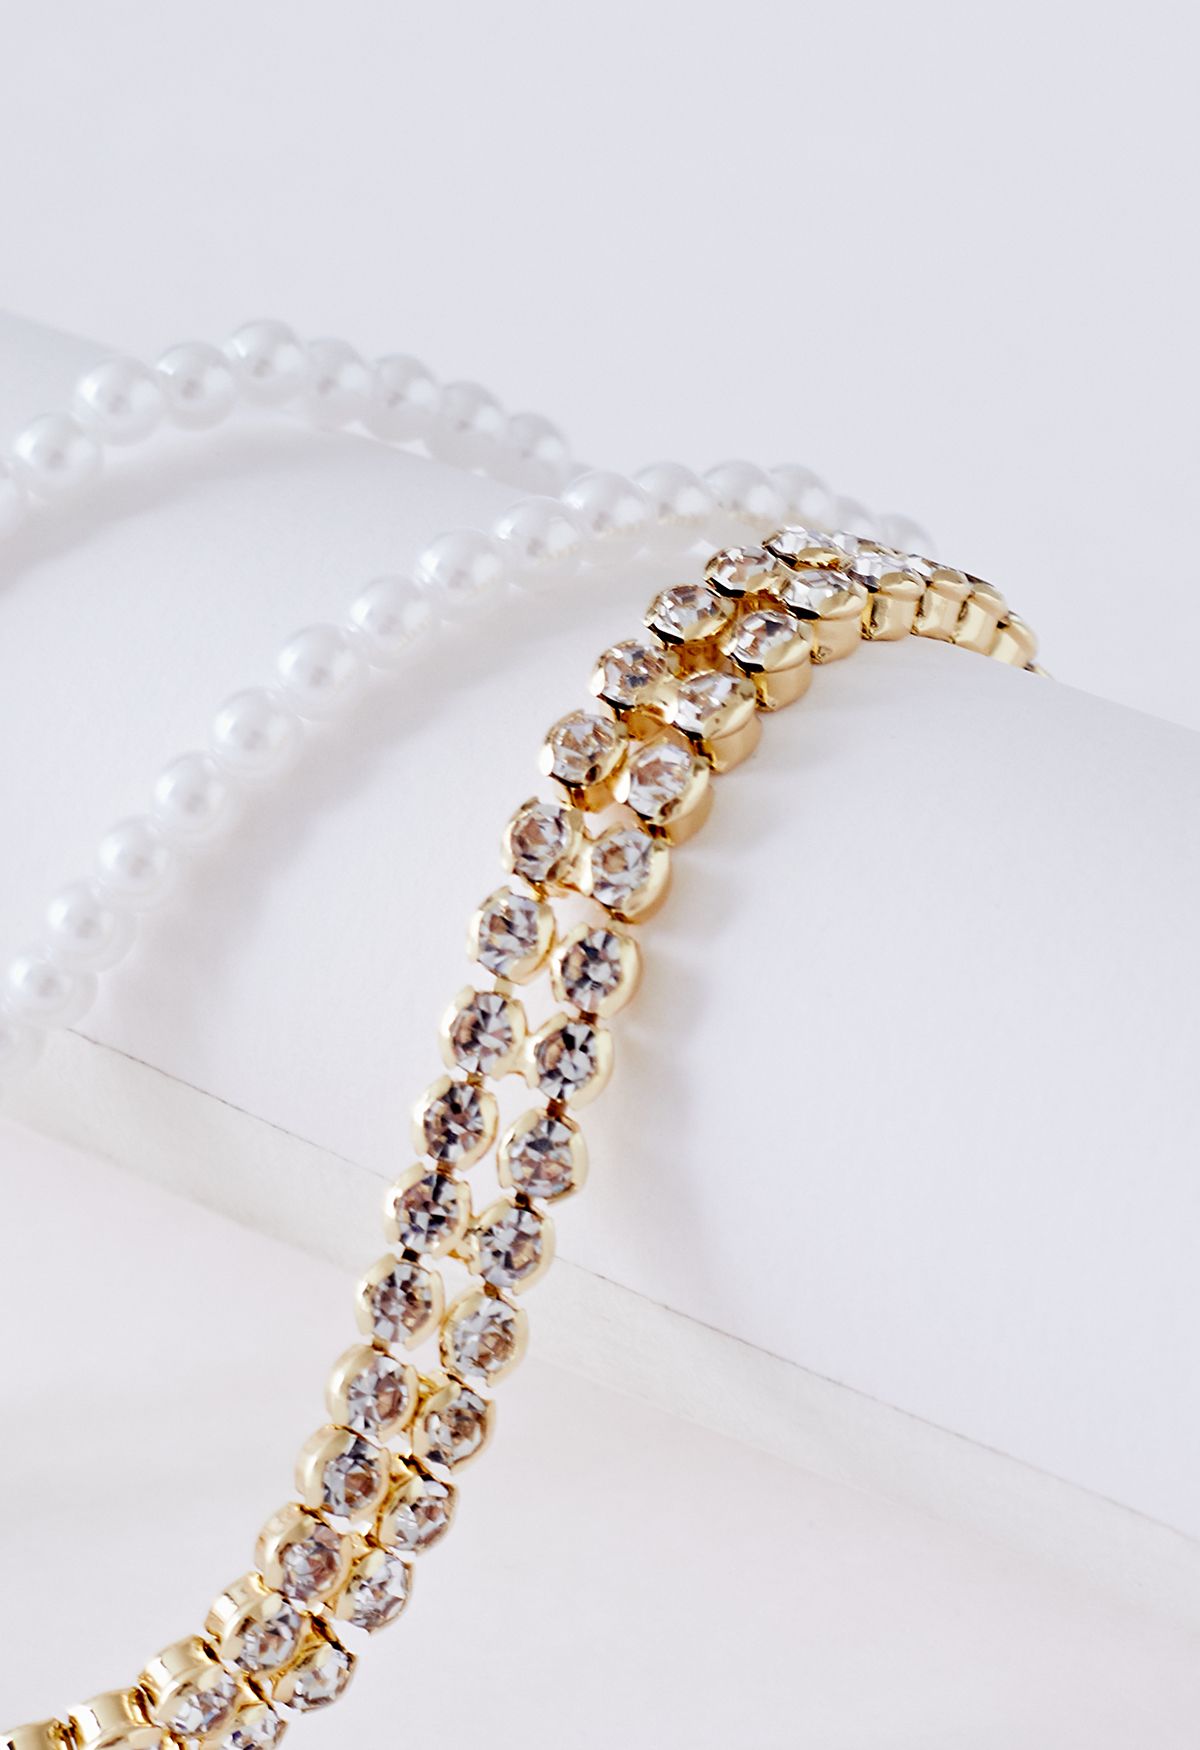 Diamond Inserted Spliced Pearl Necklace